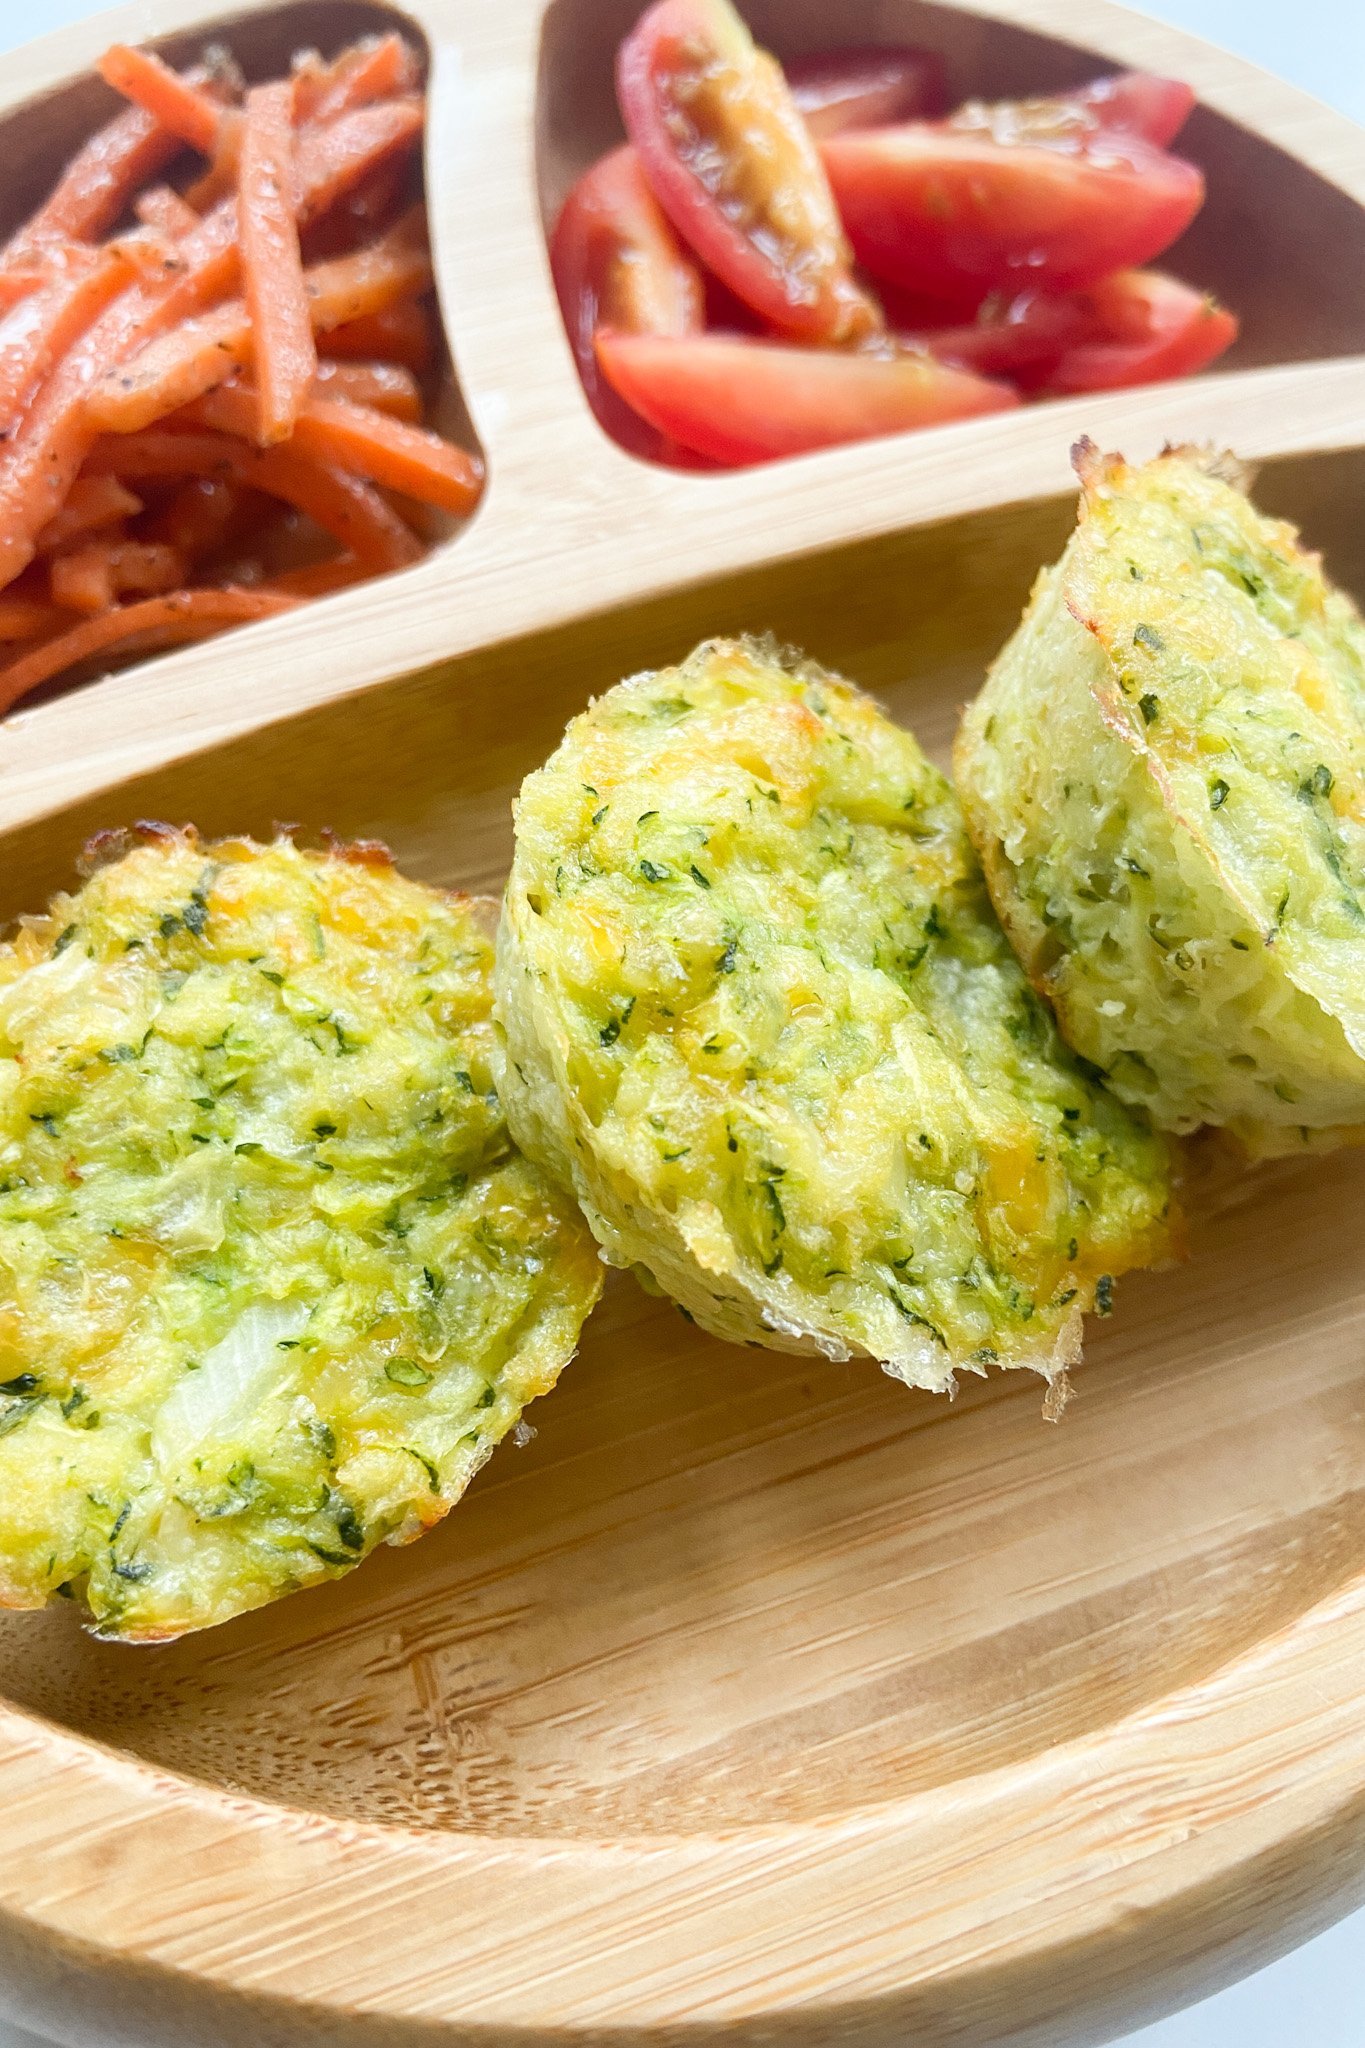 Cheesy zucchini bites served with carrots and tomatoes